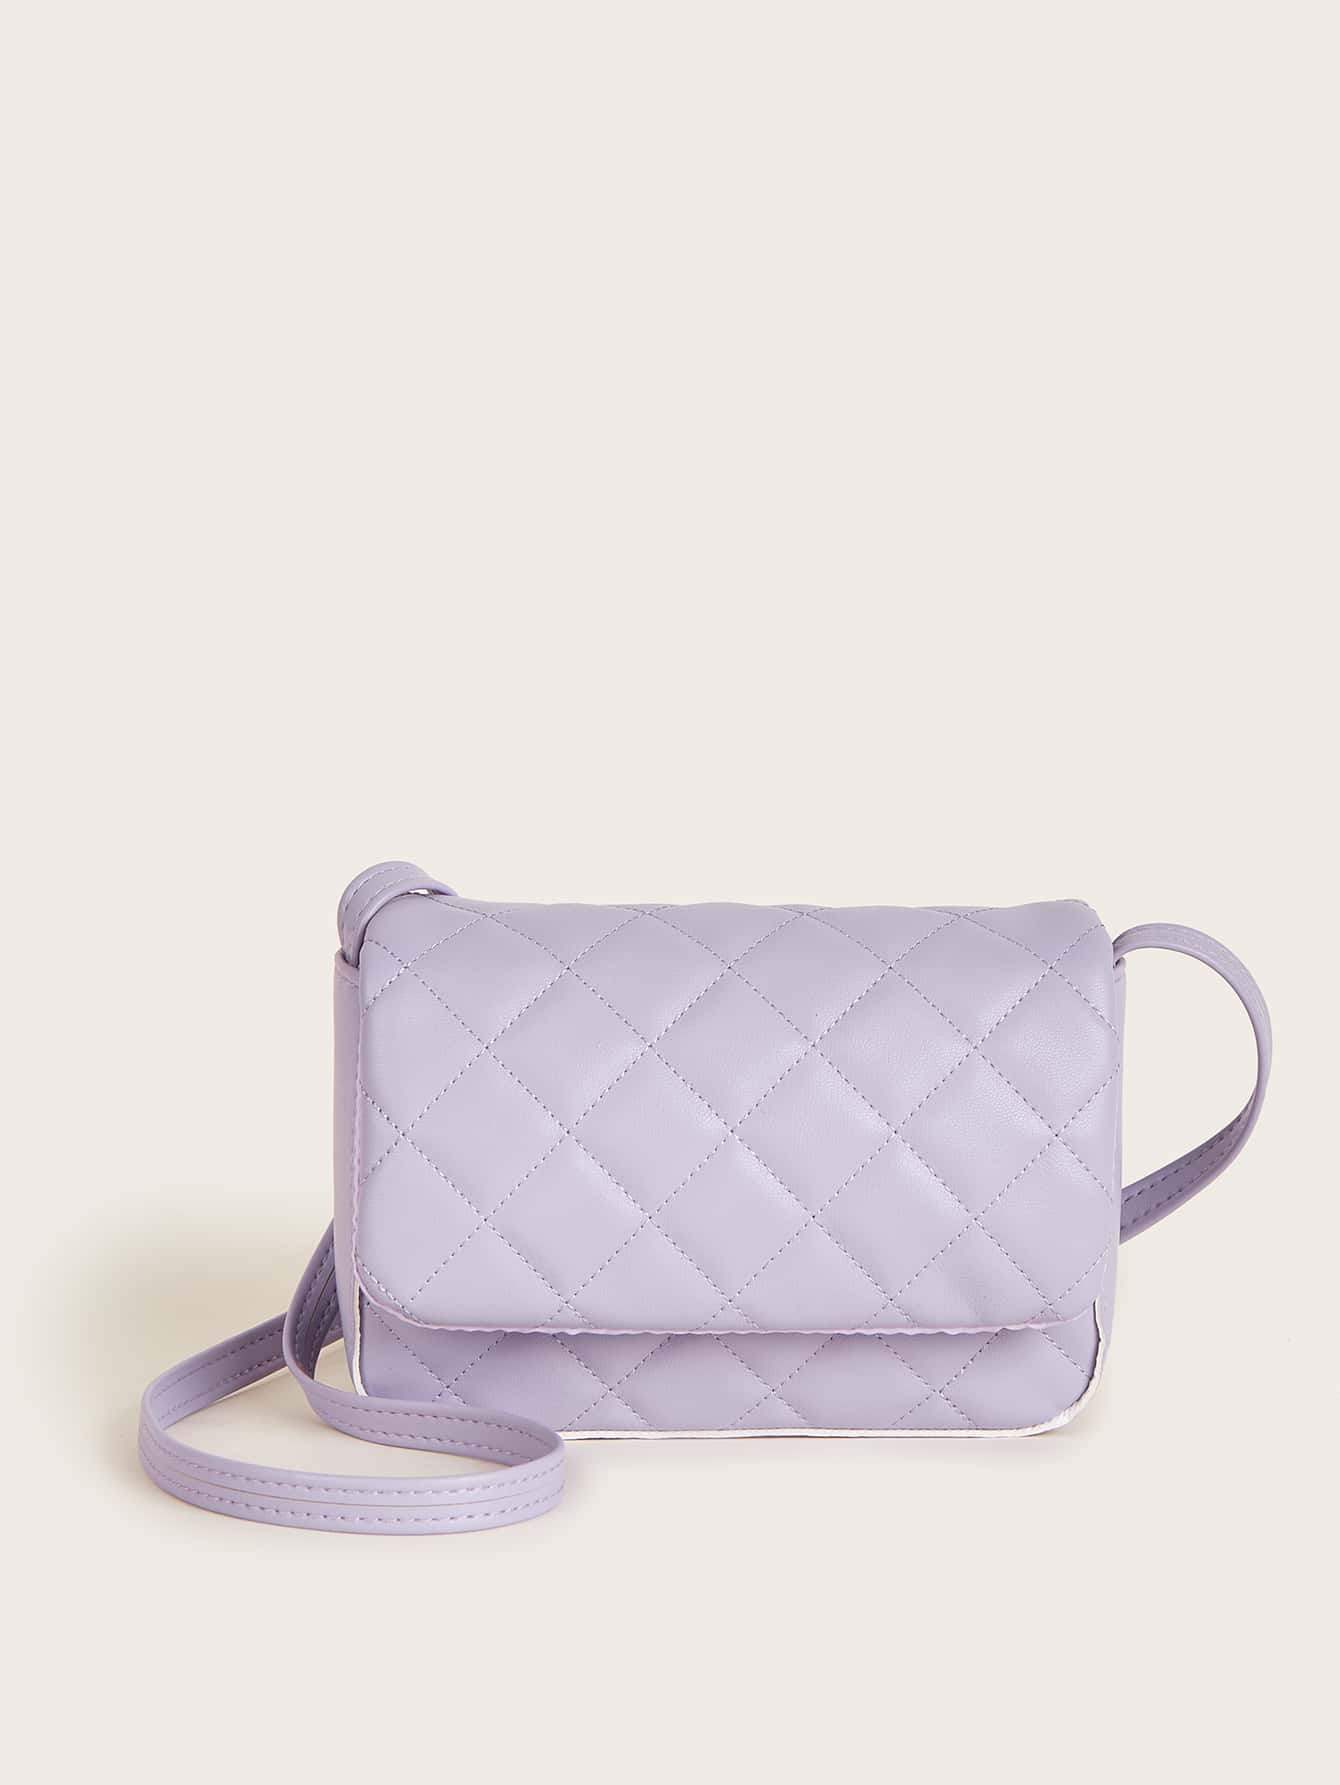 Girls Quilted Flap Square Bag